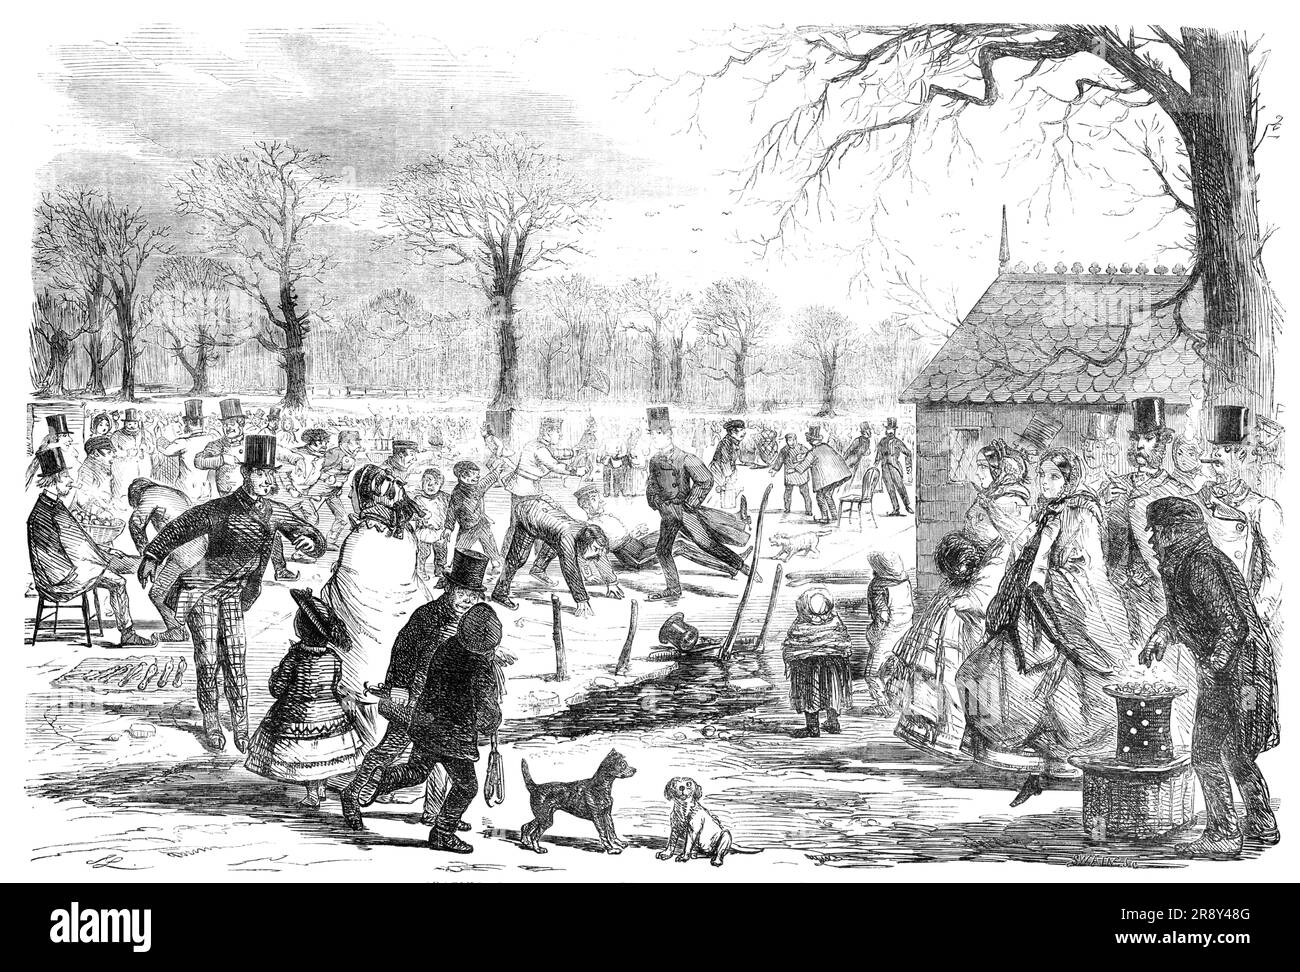 Skating in Hyde-Park - drawn by John Leech, 1857. Winter entertainment in London. '...it is in the parks where Jack Frost is to be seen in all his glory - there his admirers assemble in thousands...casting aside all distinctions of society...No bacchanalian revel more stirring and confused; and yet the only excitement is exercise!...Roasted chestnuts crackling over glowing charcoal are irresistible to boys with cold hands and a penny. And yonder battered merchant, henceforth immortalised by Mr. Leech's pencil, will...perhaps have a supper of tripe from the gains of the morning...Hark! a dull, Stock Photo